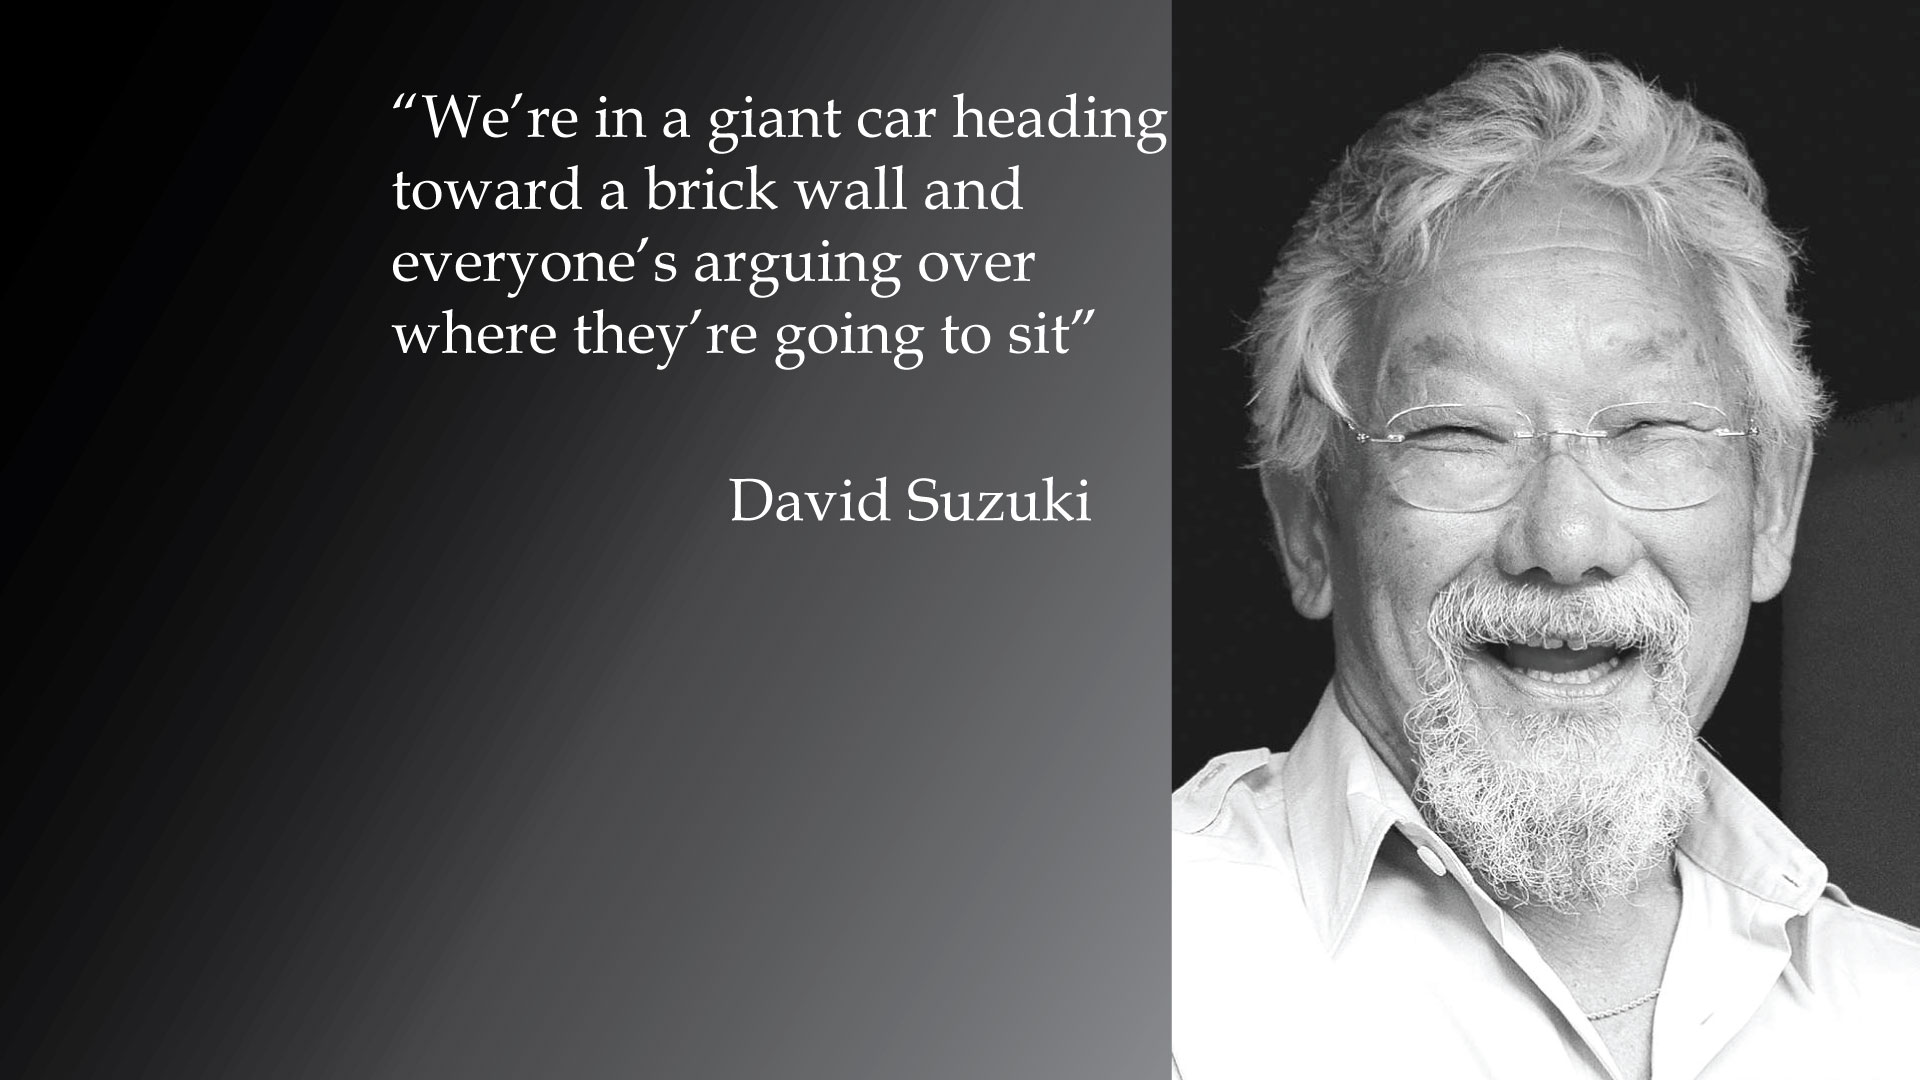 David Suzuki's quotes, famous and not much - Sualci Quotes 2019